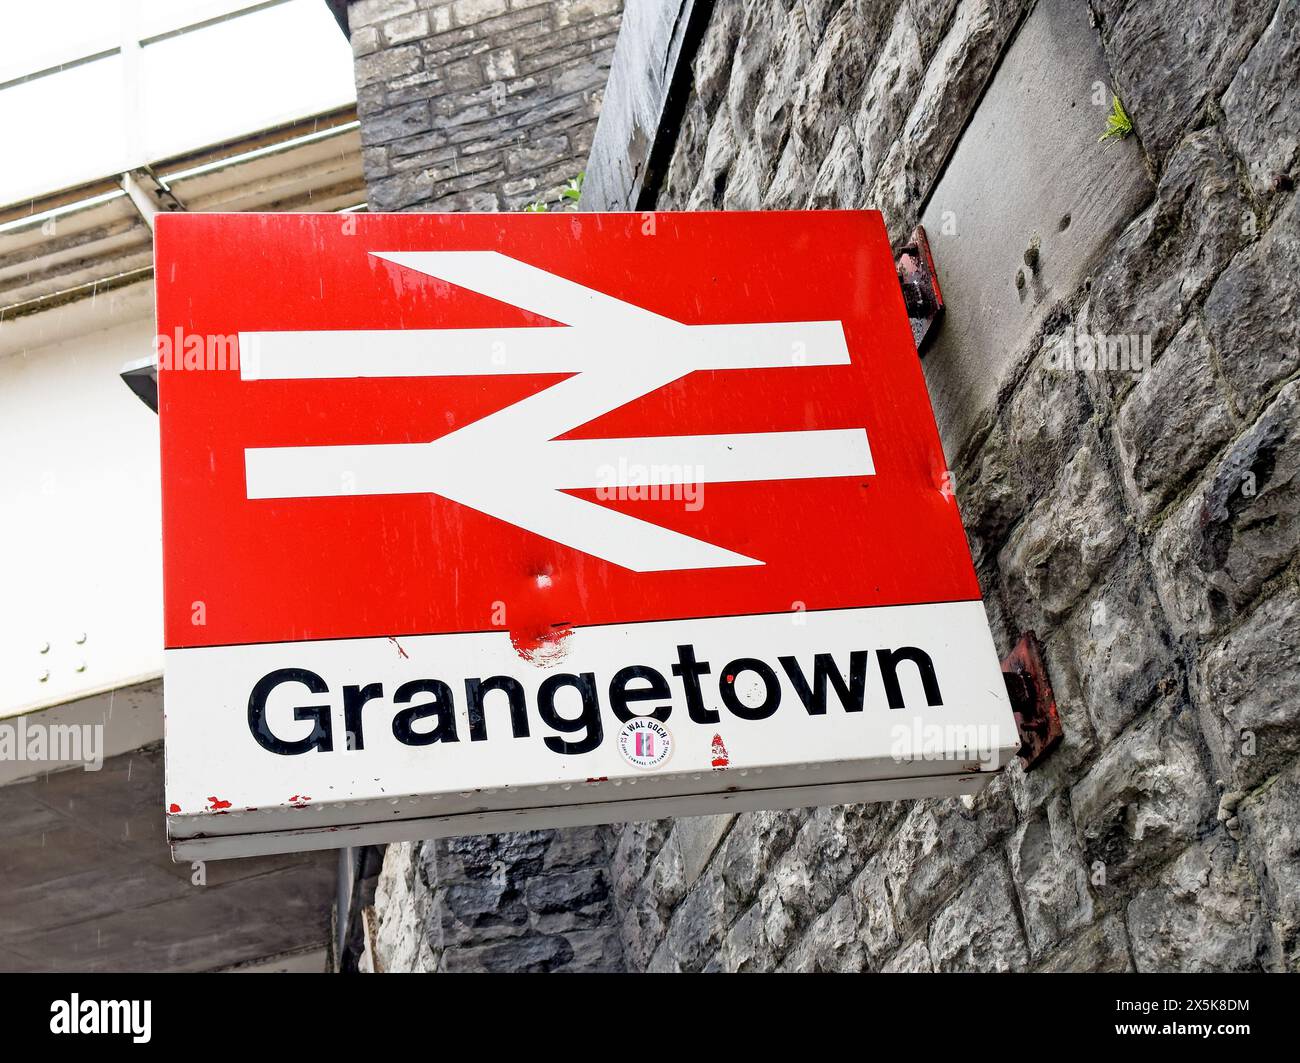 Red / White BR sign - Grangetown district Railway Station entrance , Cardiff, Wales, CF11 7JB Stock Photo